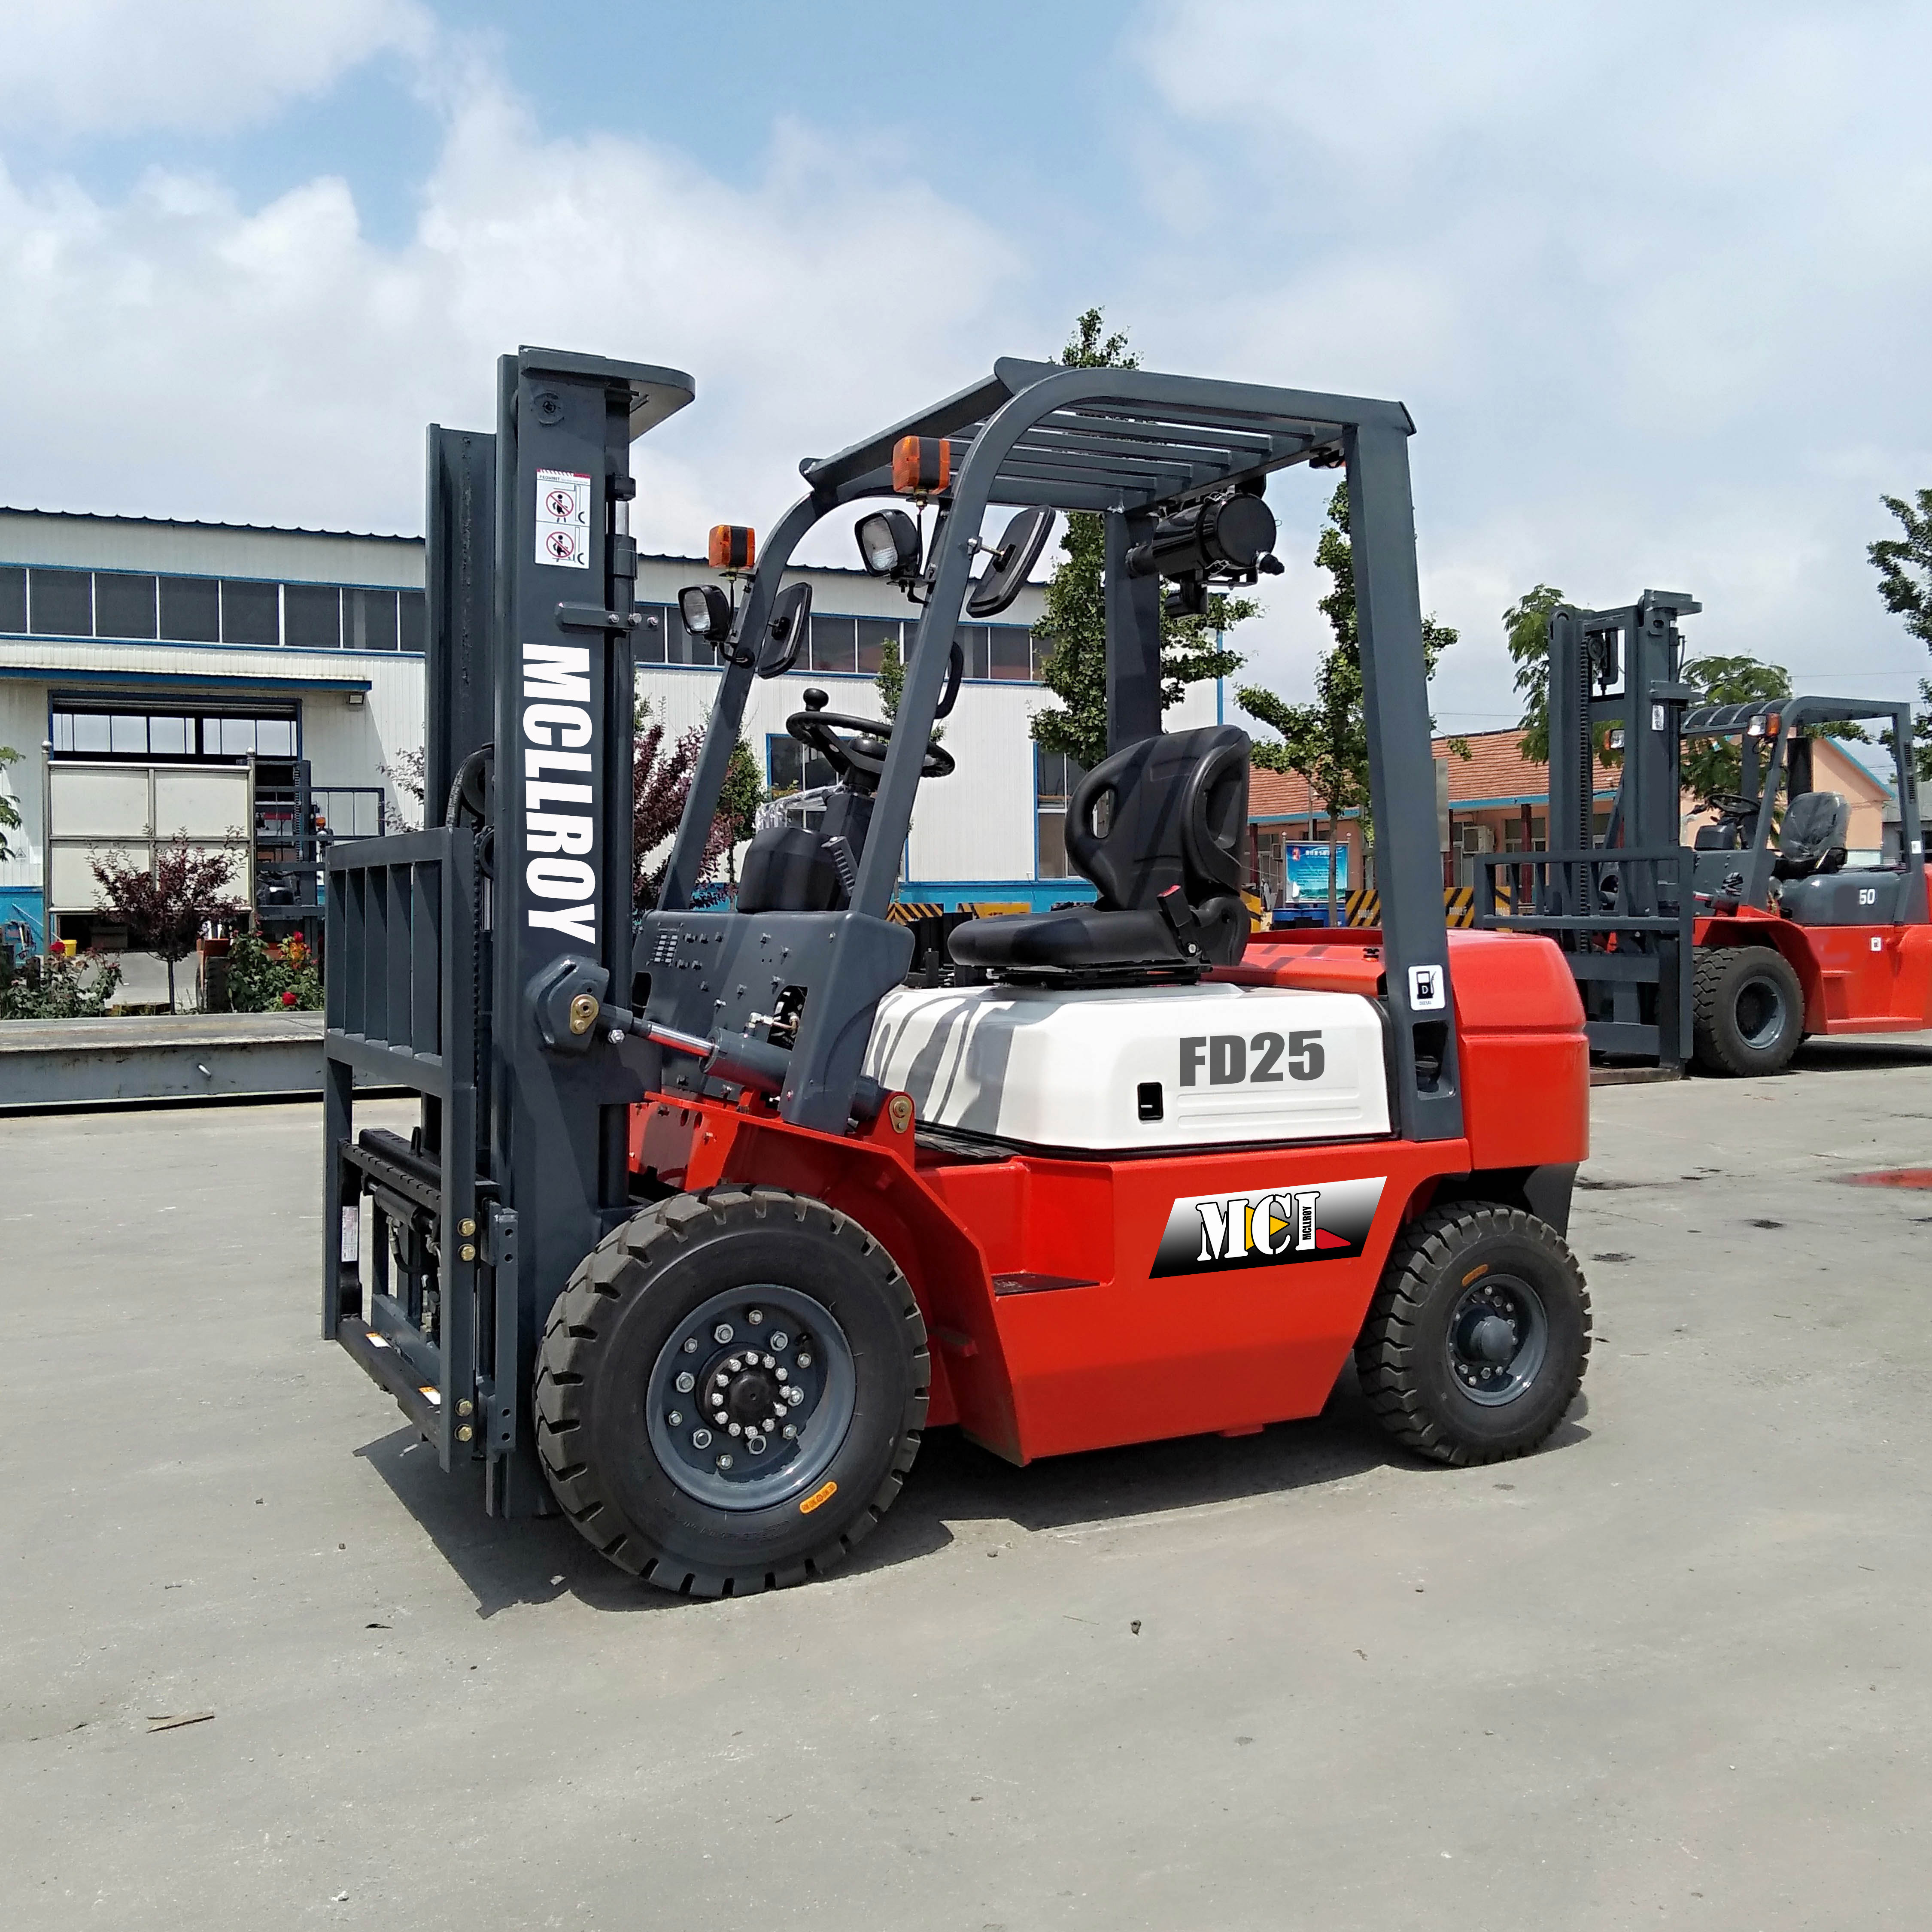 IC Diesel Counterweight Forklift FD25 2.5 Ton Multipul Attachment